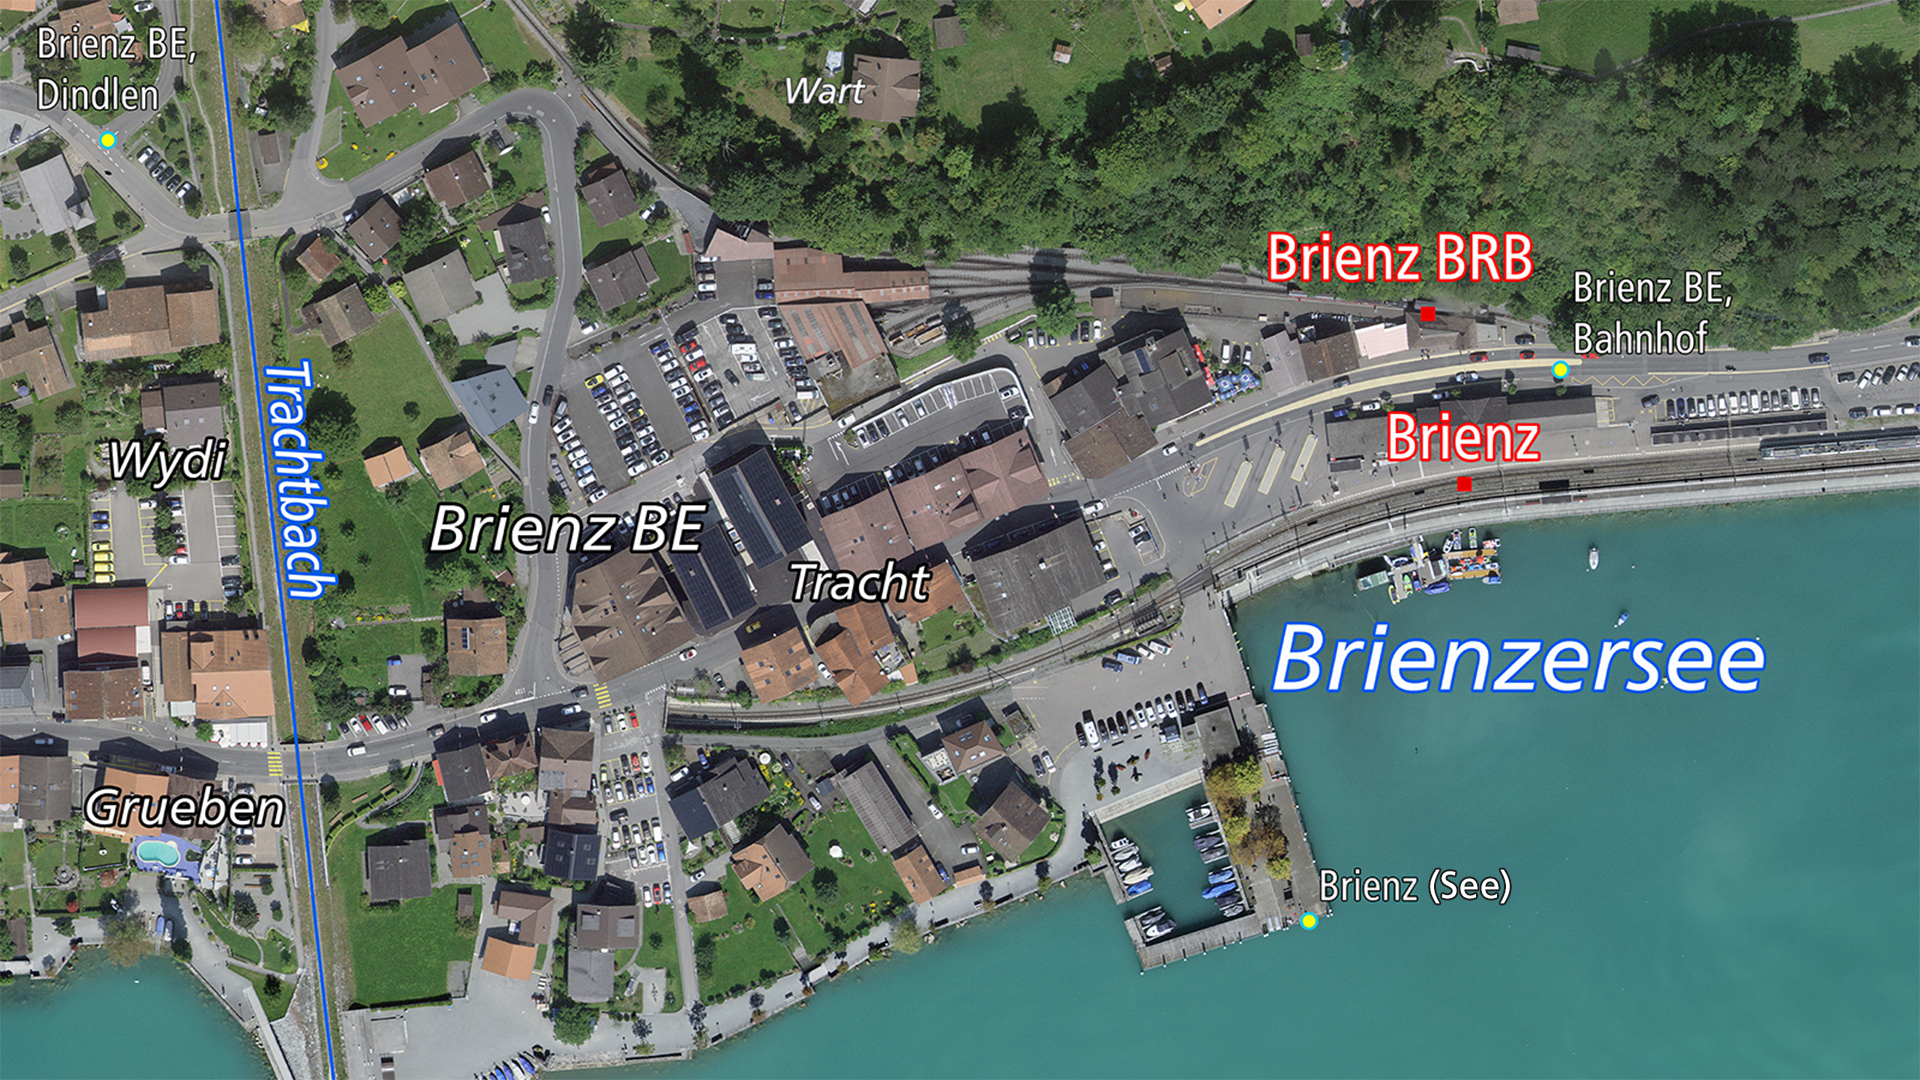 The picture shows an aerial image which is overlaid by geographic names of Brienz